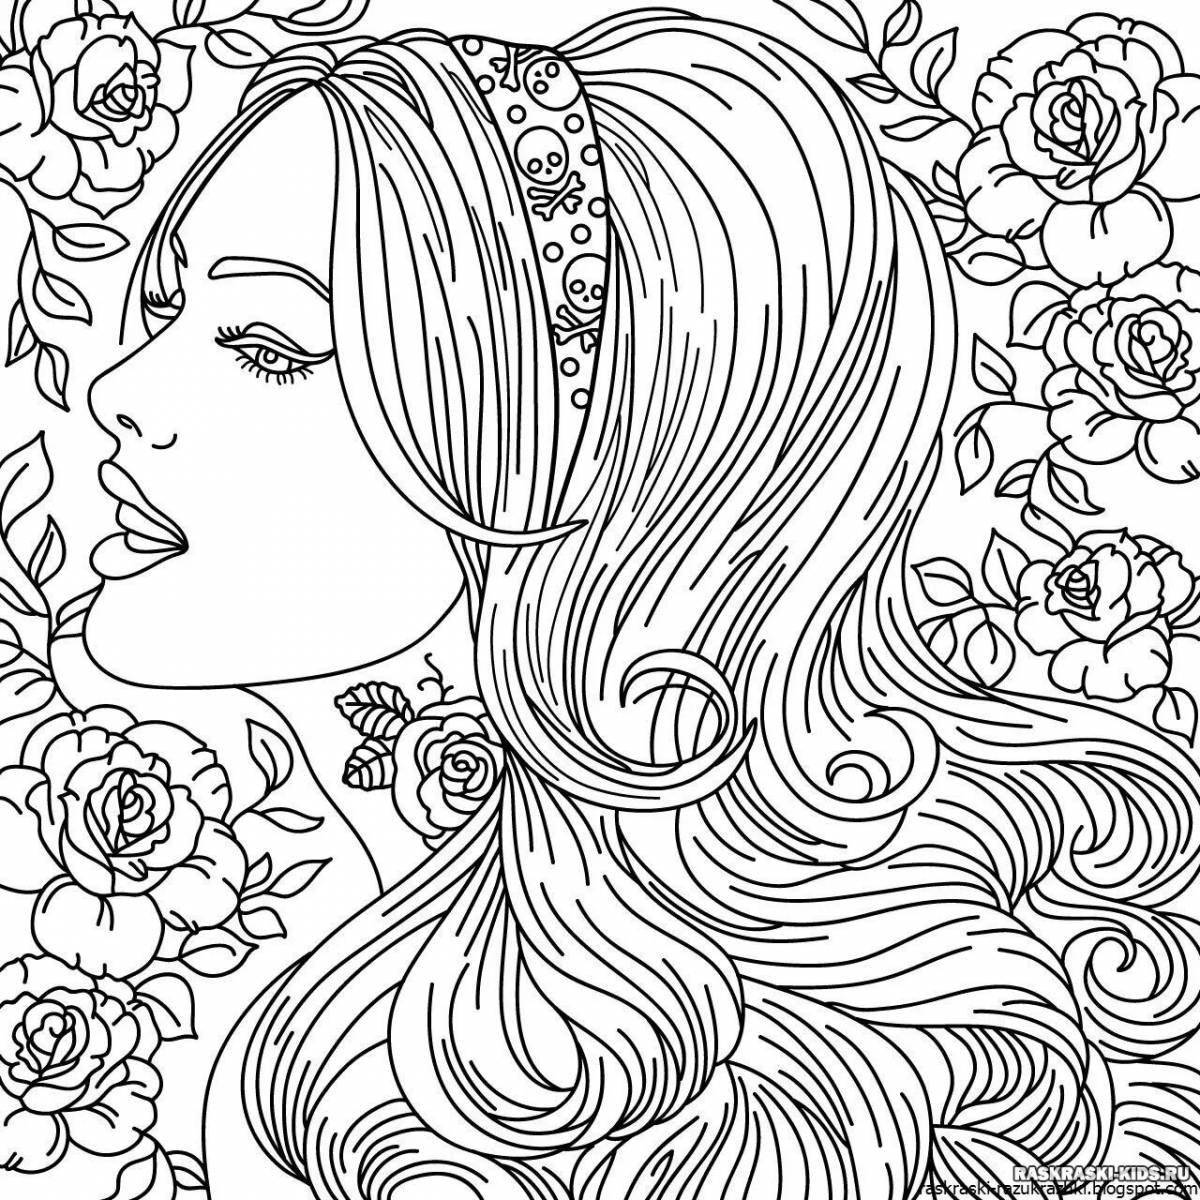 Professional coloring - ornate